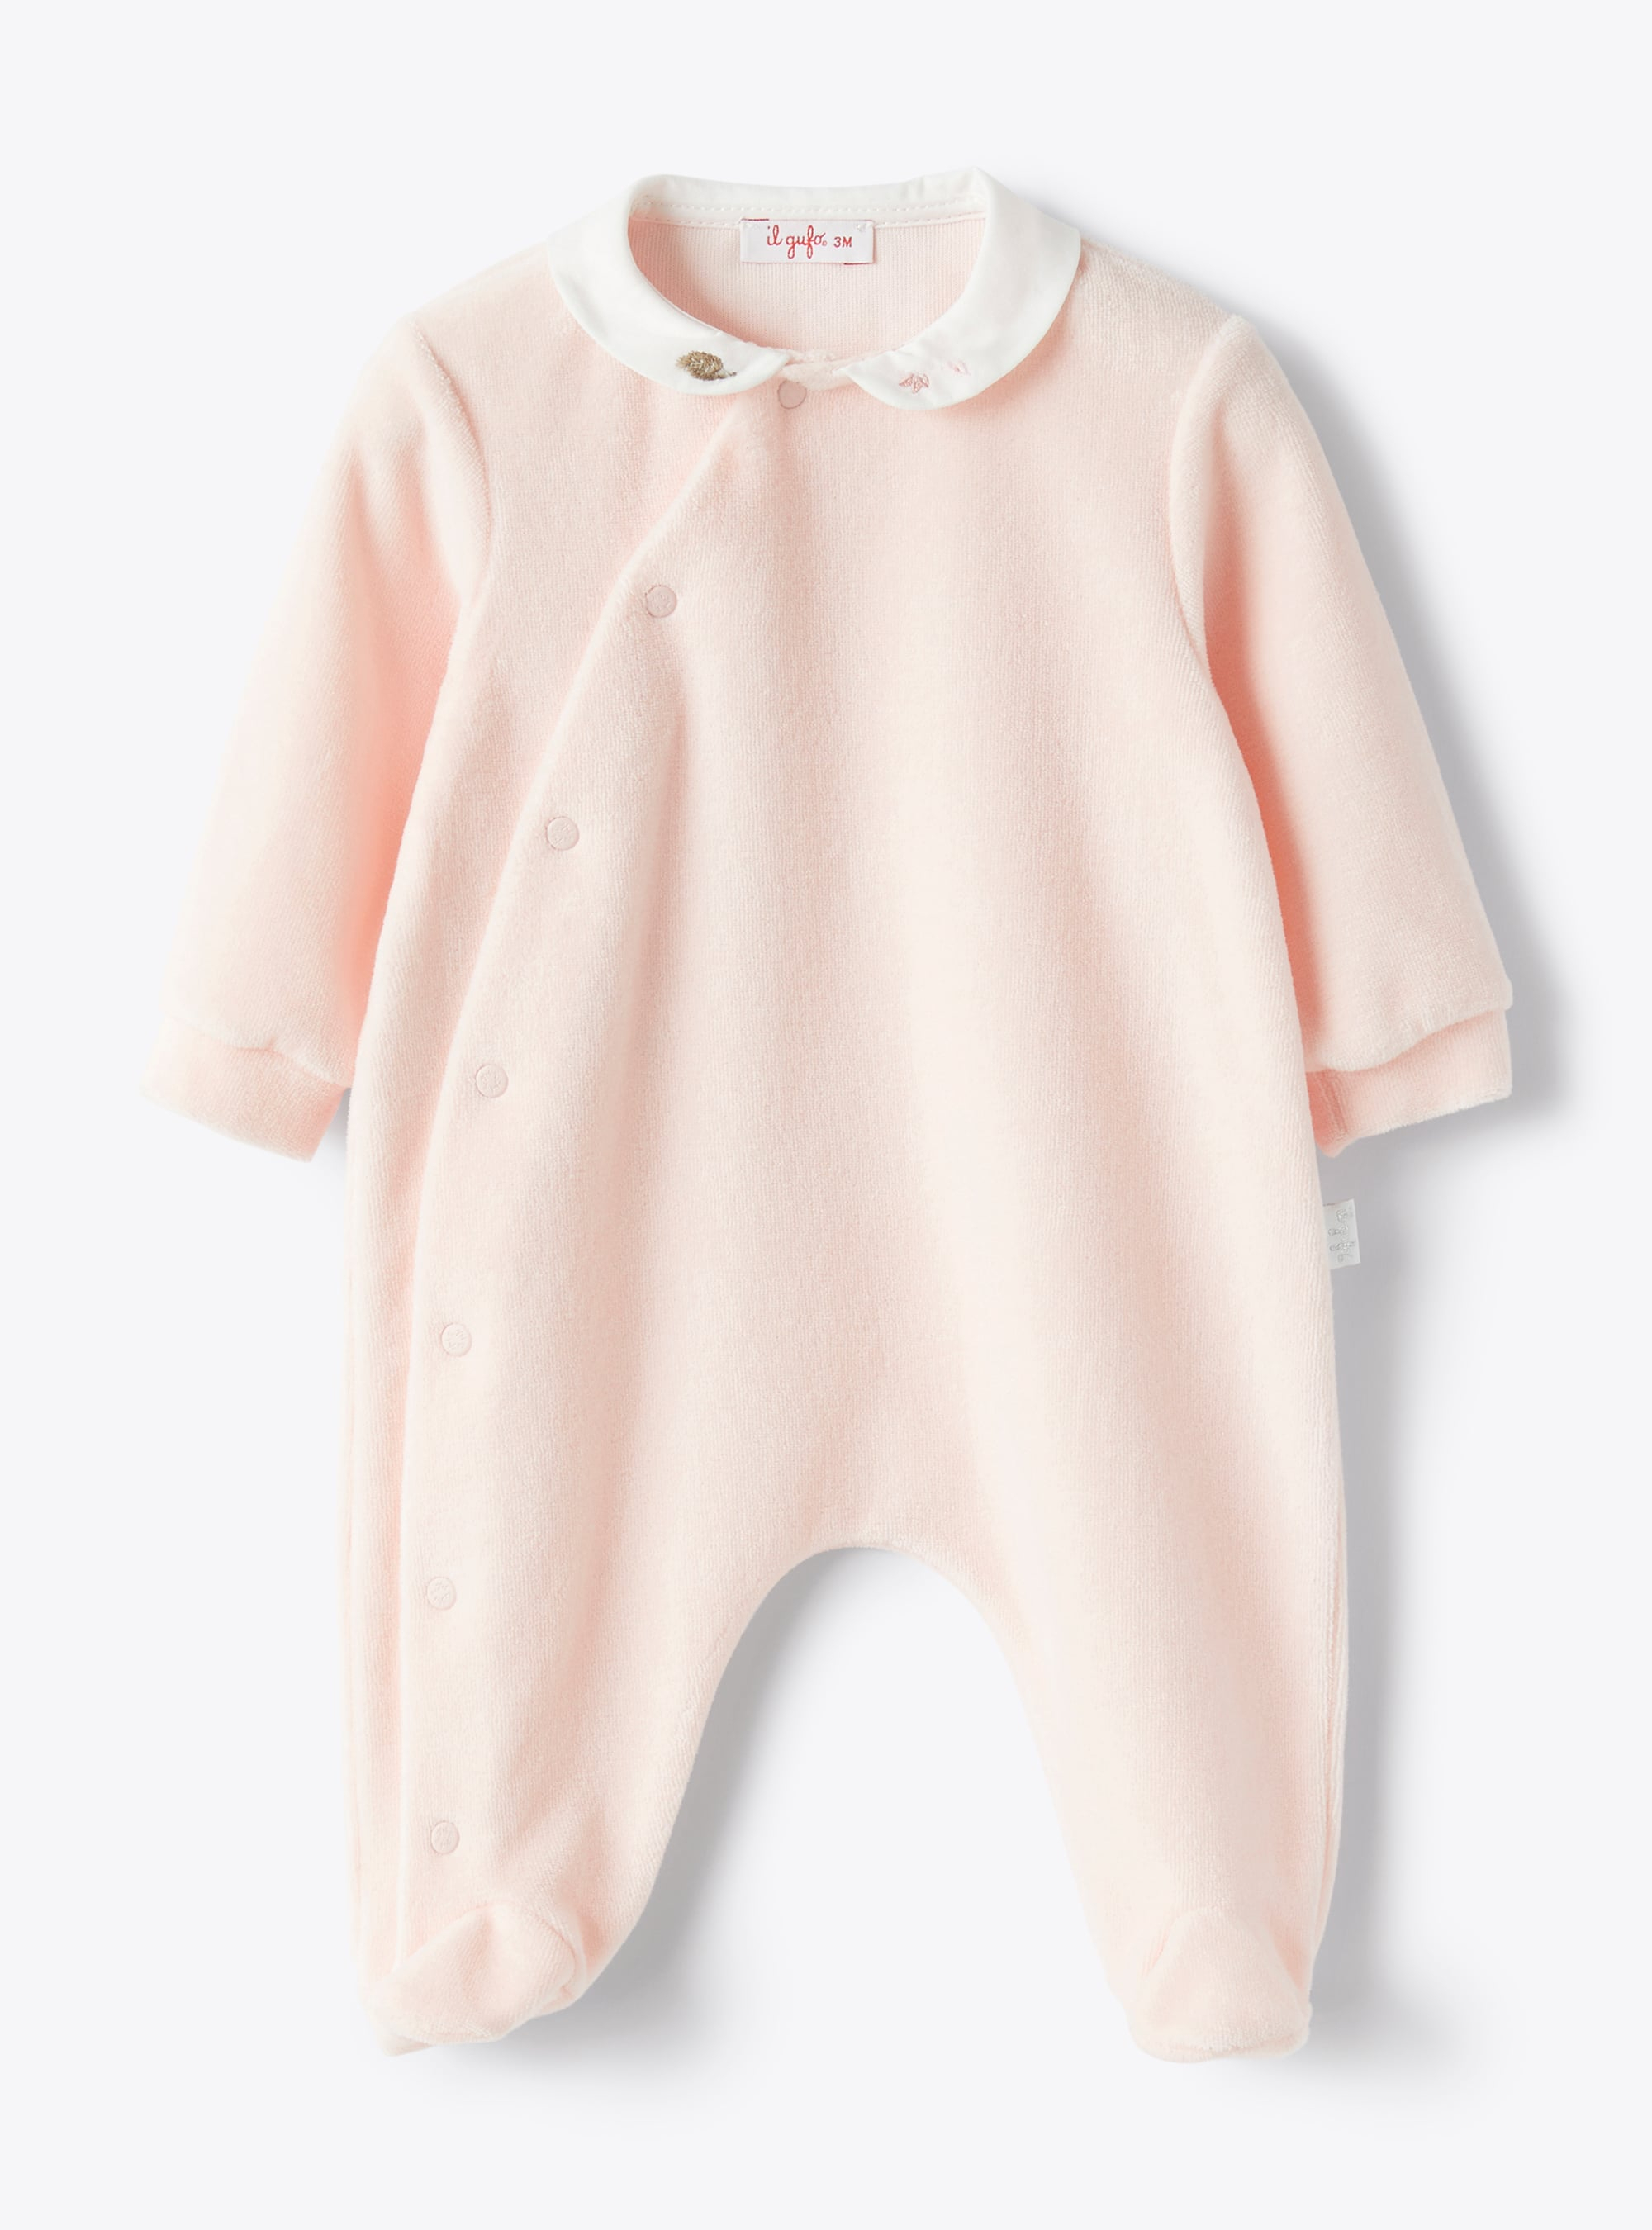 Babysuit in pink chenille with embroidered details - Pink | Il Gufo